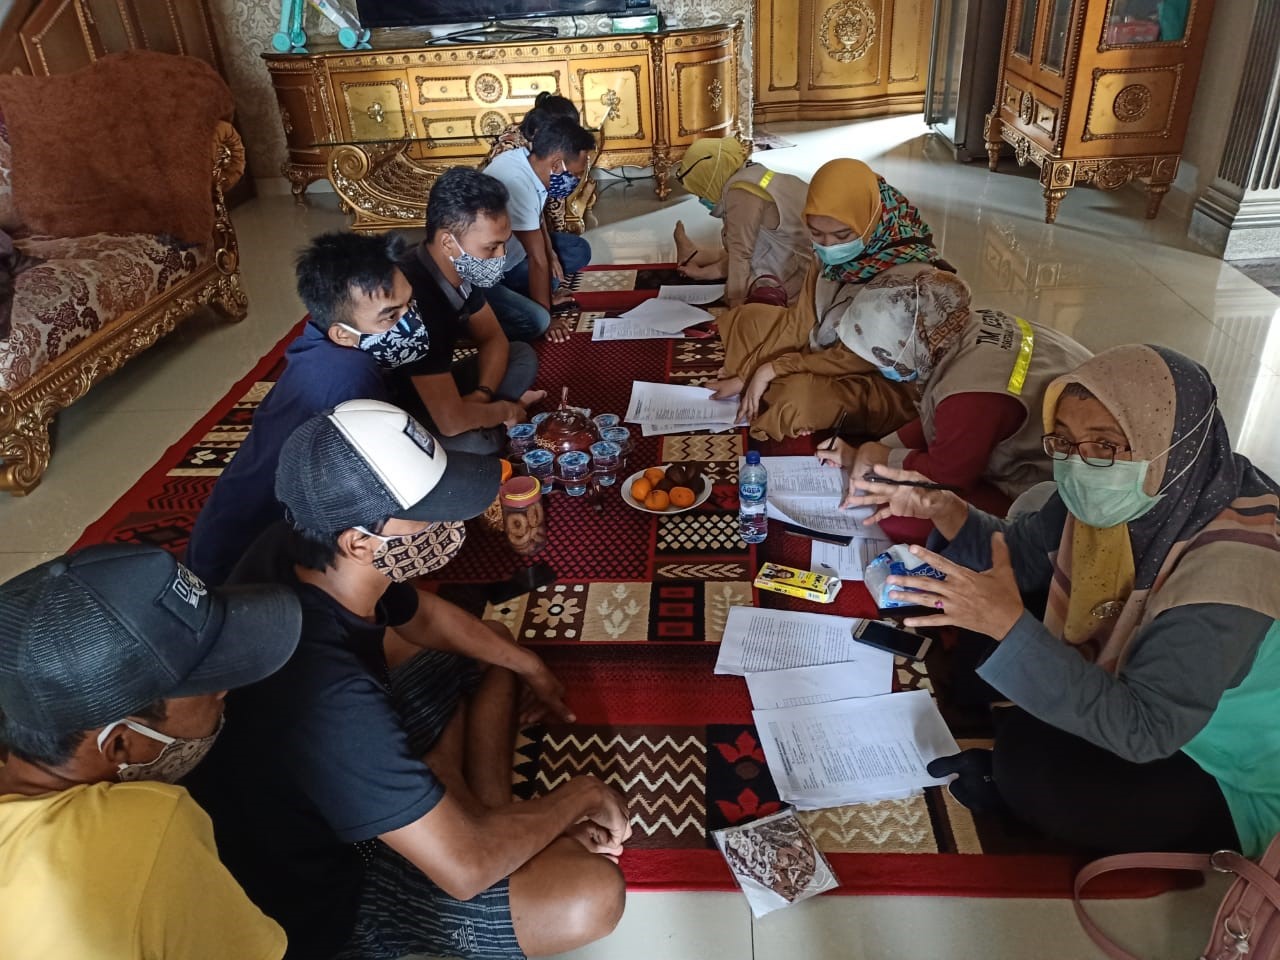 Field Visit to Lombok Barat to Assess the Current Practices of Healthcare Providers in Providing Health Services to Mercury-exposed Residents as well as those Affected by Mercury Pollution in the ASGM Area and Identify Key Service Problems/gaps, 7-9 April 2021